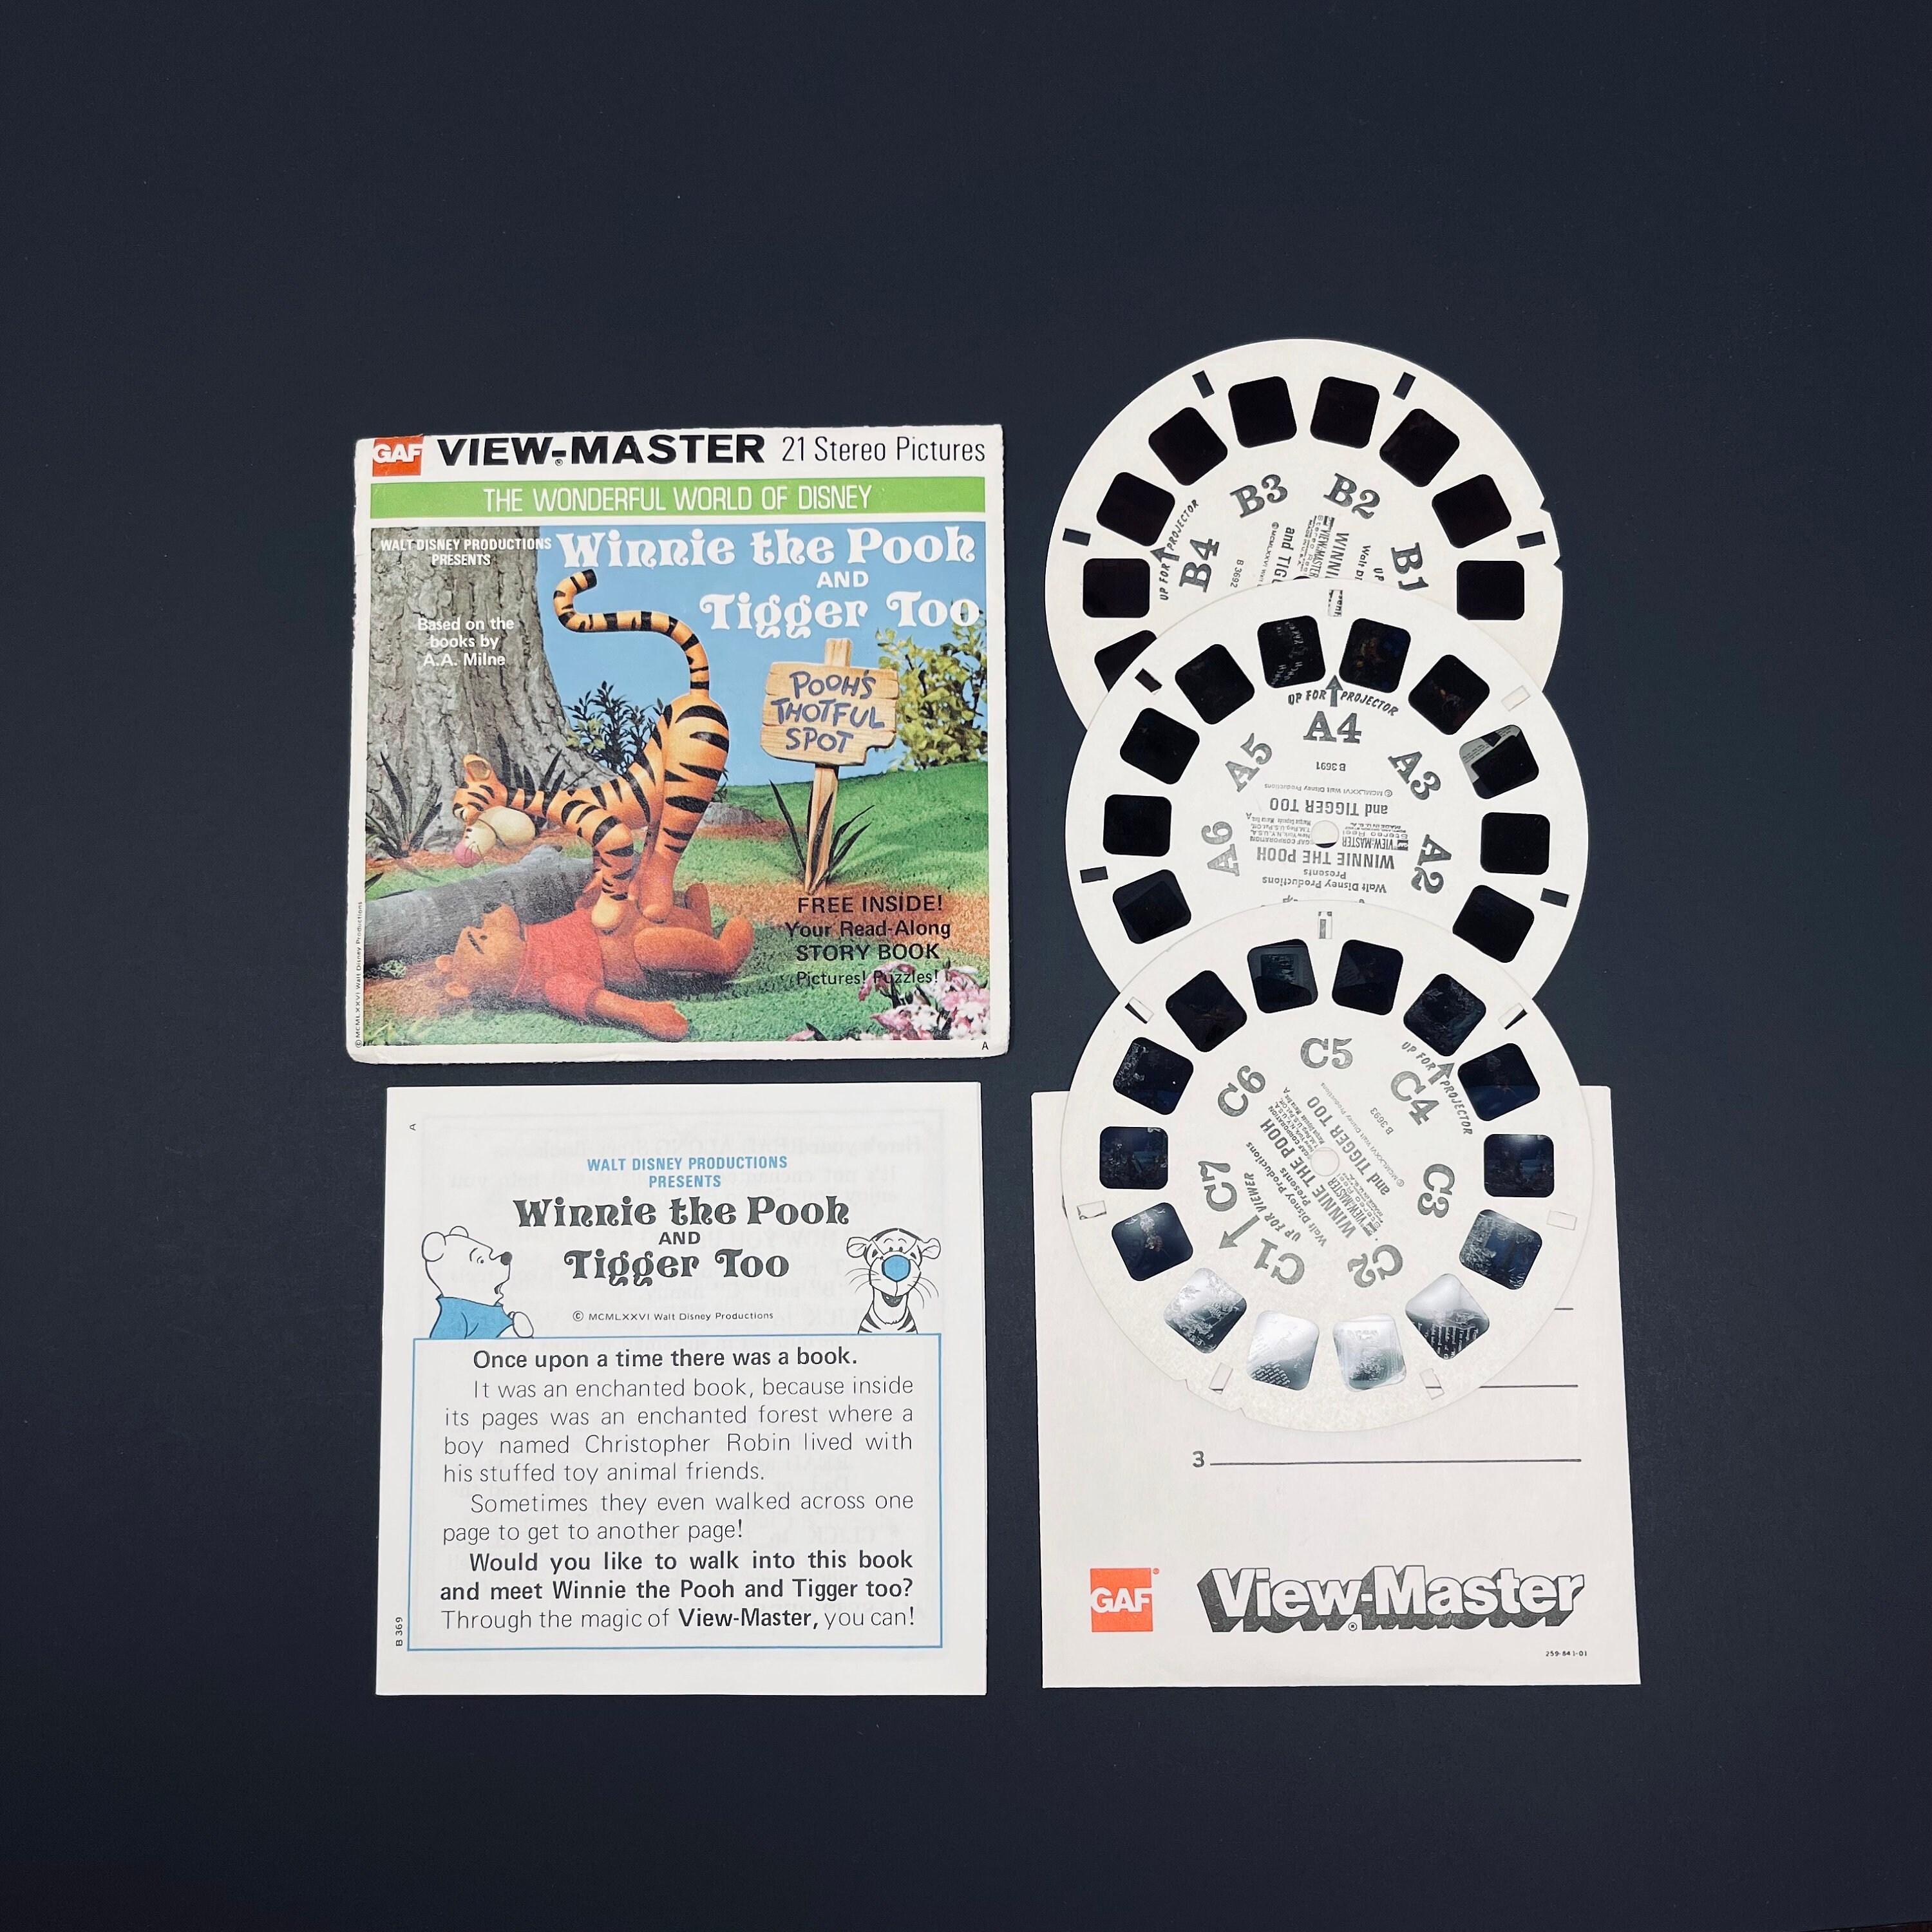 Make Your own Customized View-Master Slide Reel 